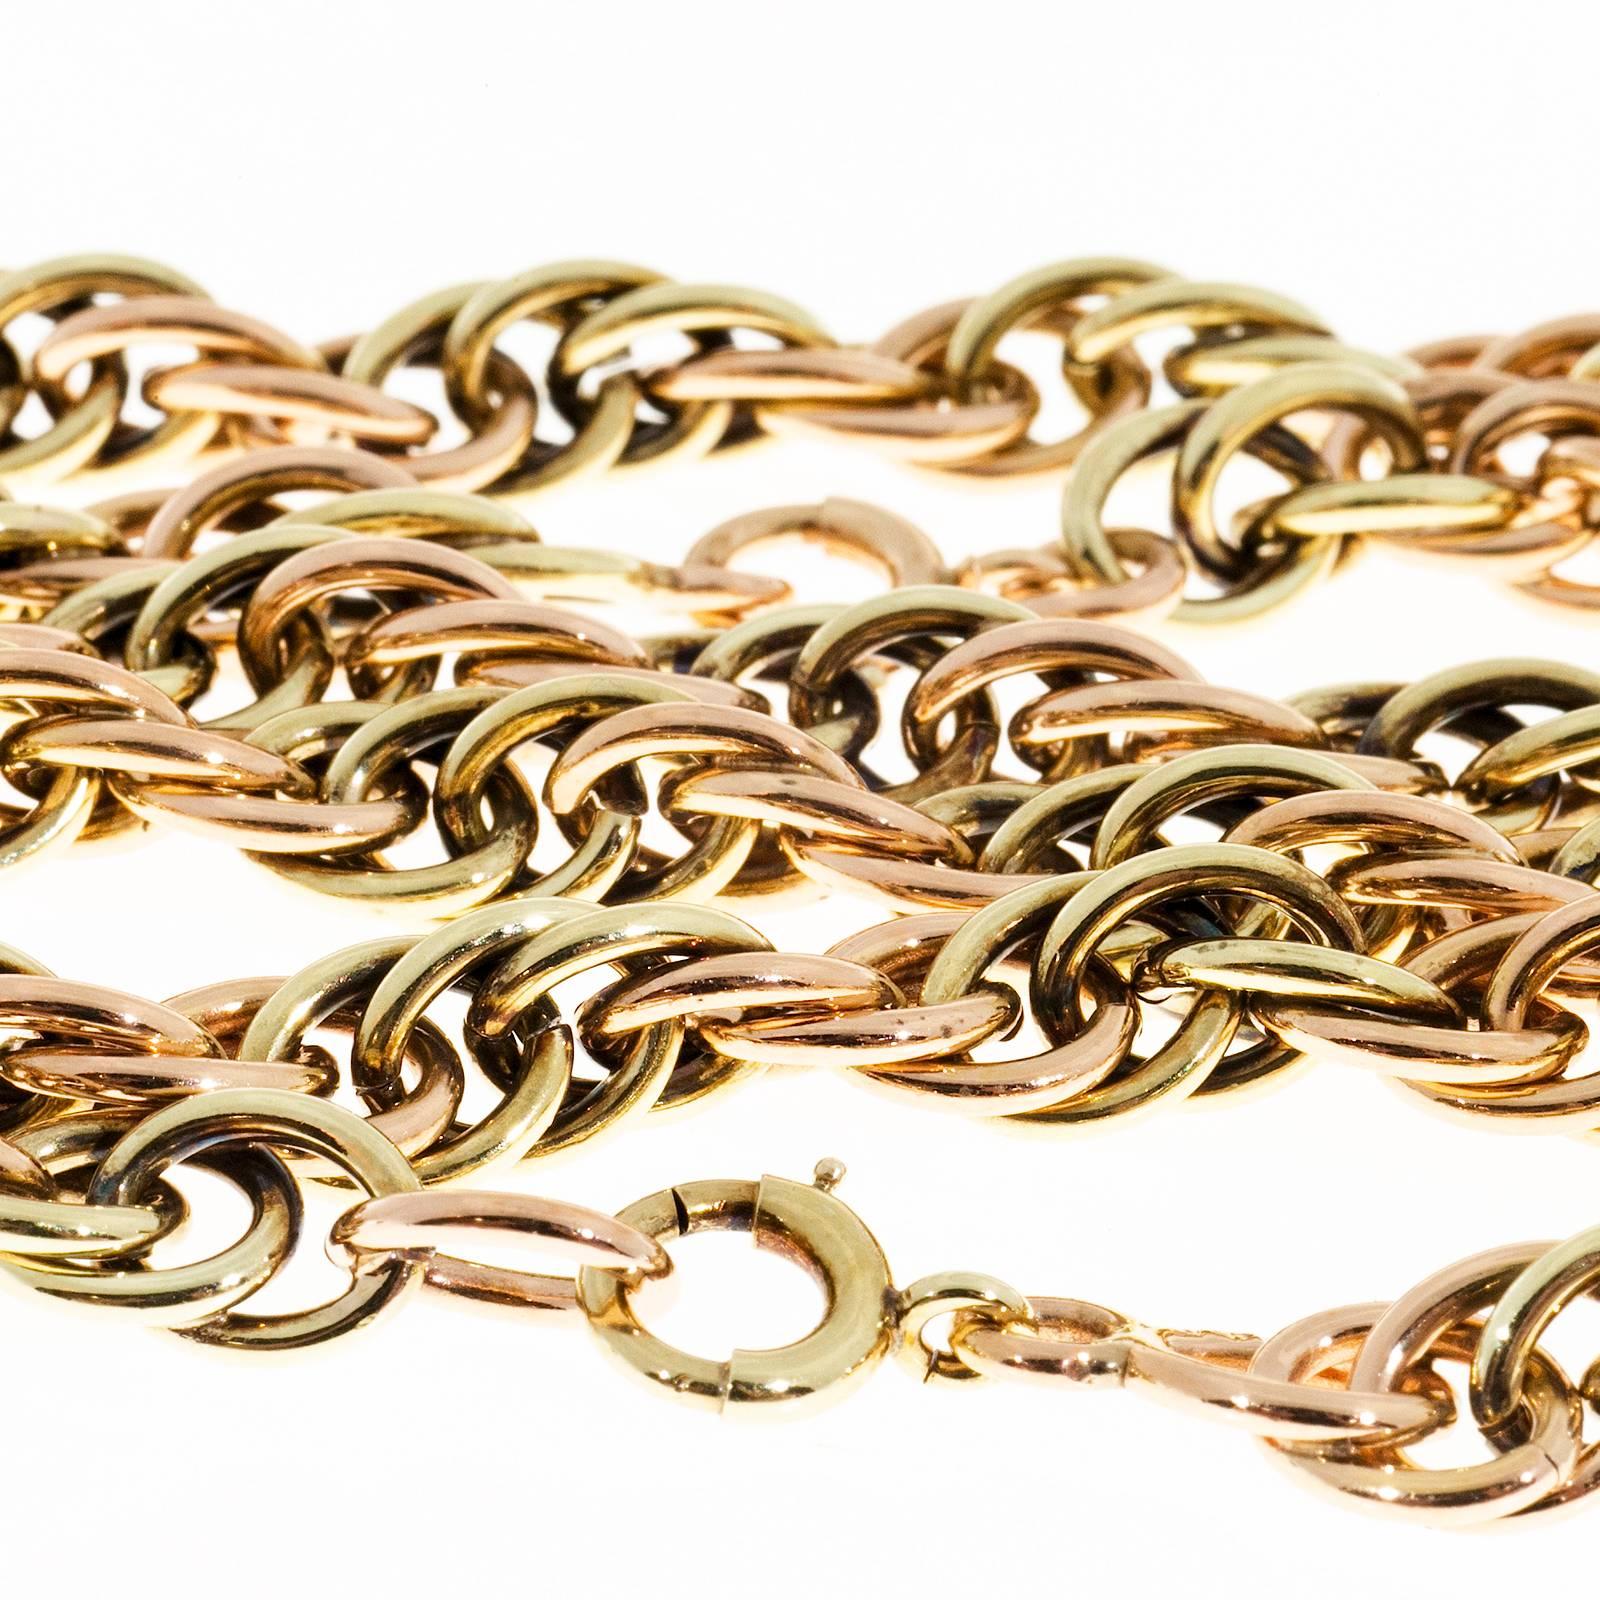 Retro 1940's Rose and green gold necklace and bracelet set. Solid gold heavy wire links. Original spring ring catches. Bracelet and chain hook together to make a 24 inch necklace

14k Rose Gold
Tested: 14k rose
Stamped: 14k
8.2mm wide
Chain: